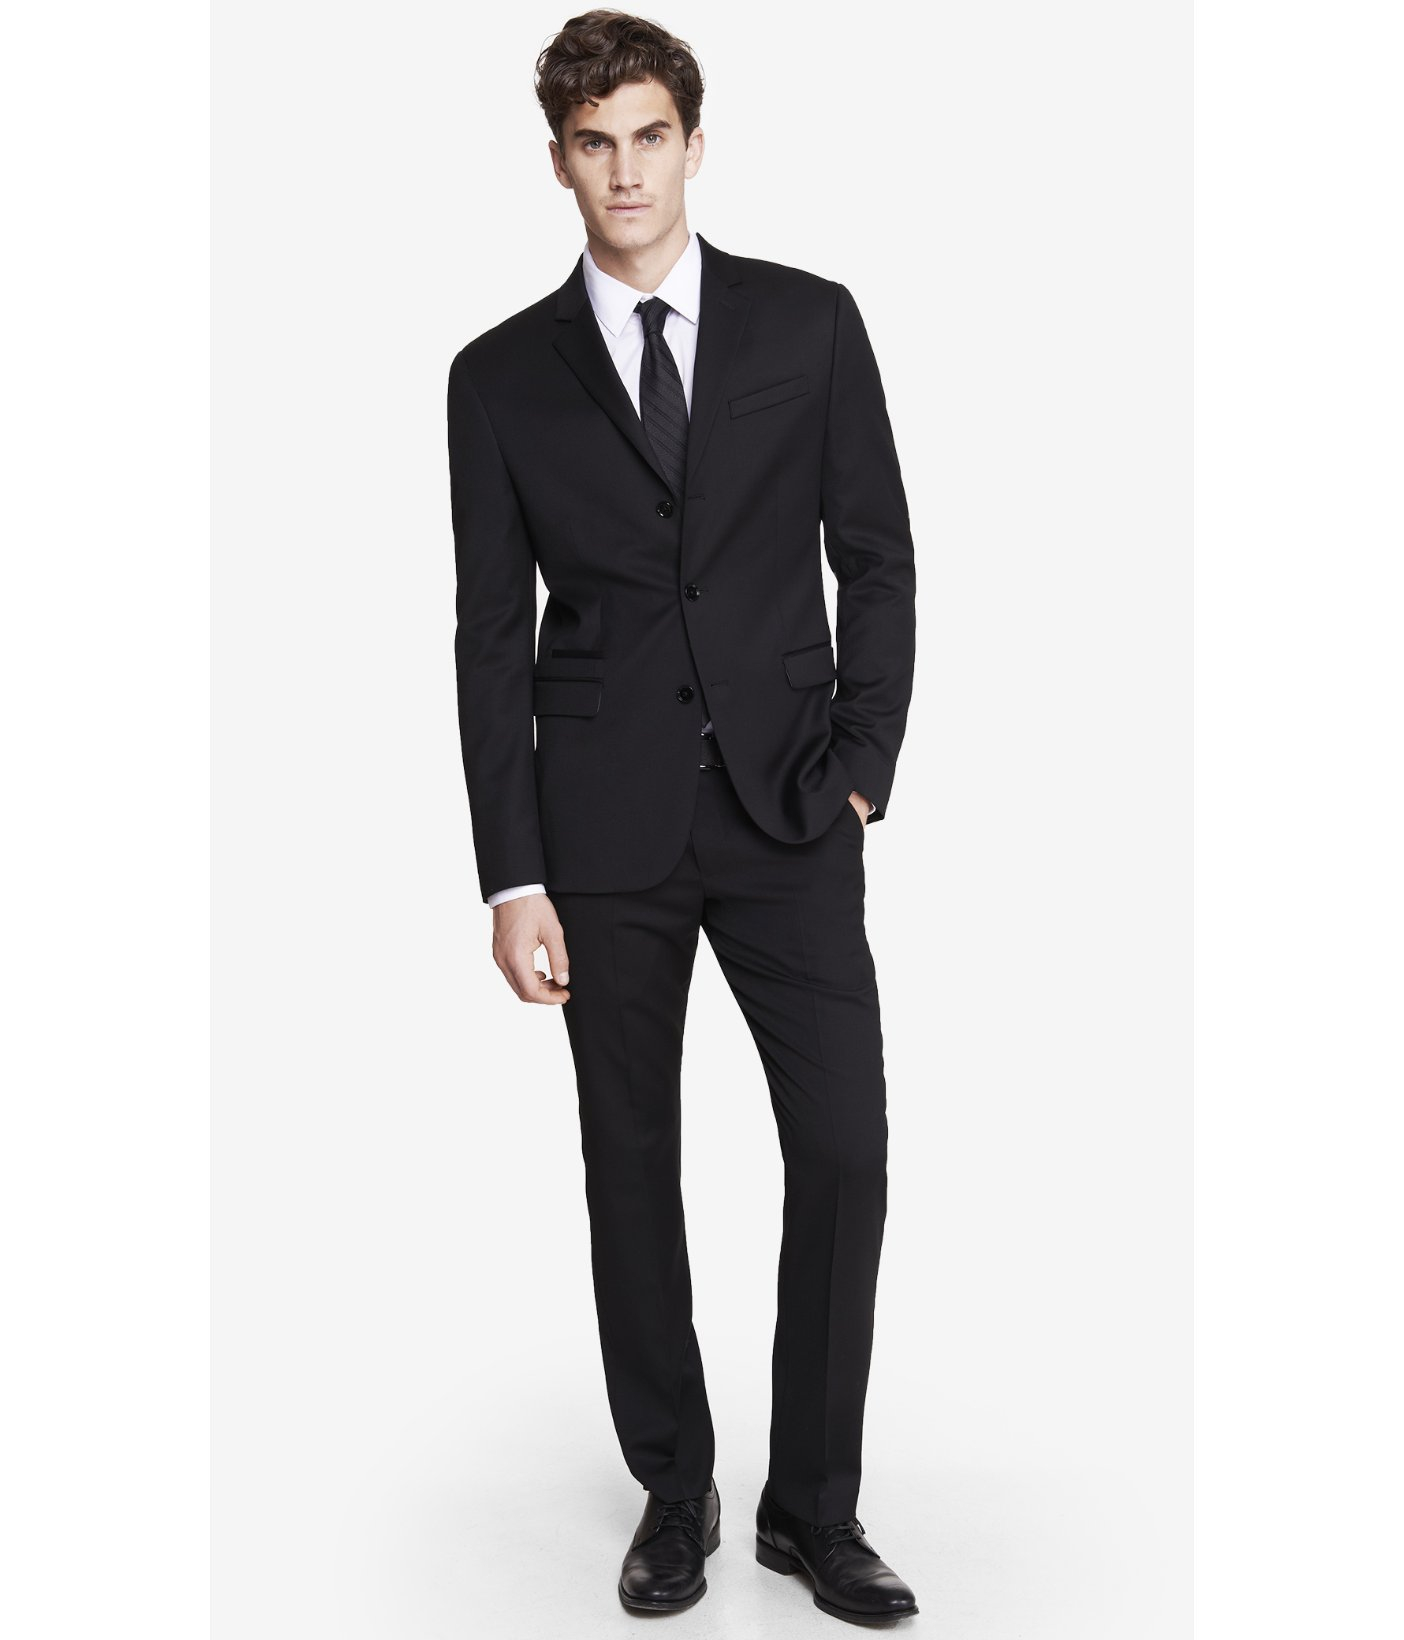 Lyst - Express Black Three Button Photographer Suit Jacket in Black for Men